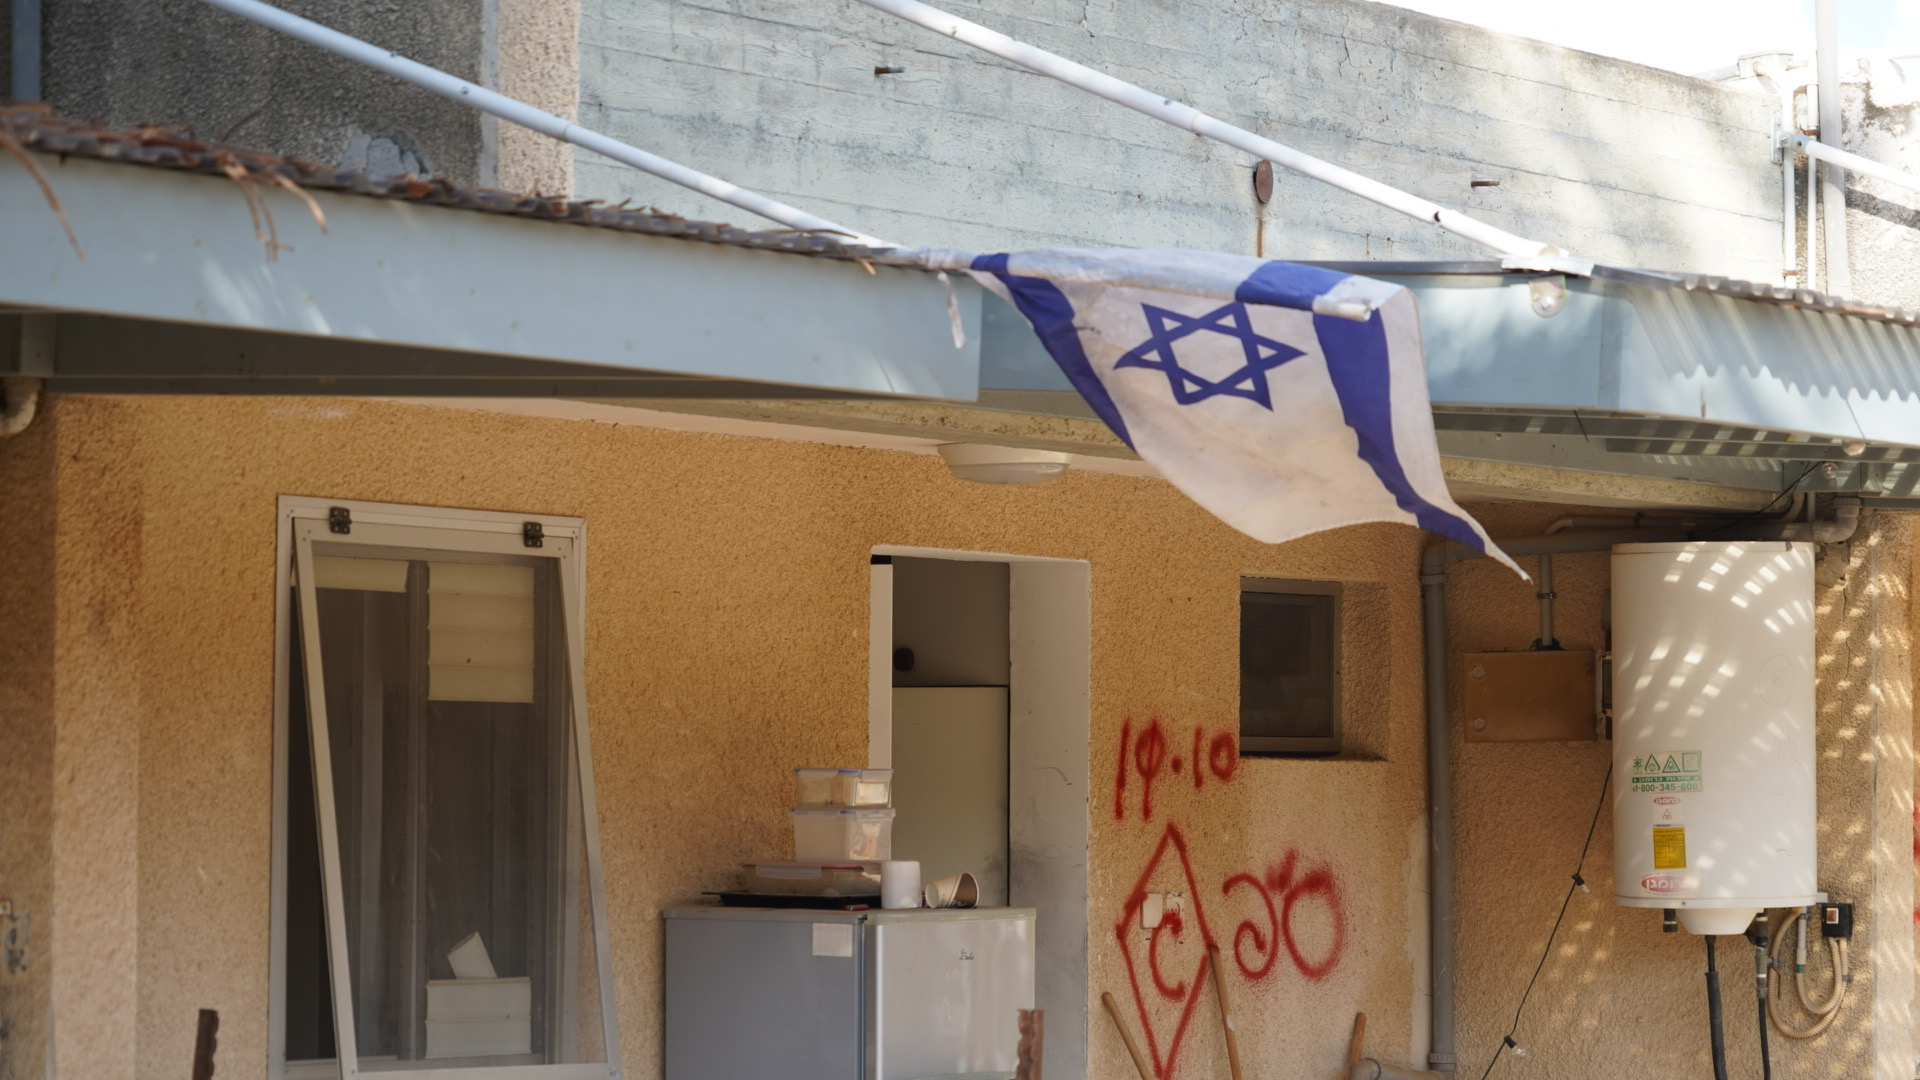 An israeli flag hangs off the side of a graffitied building